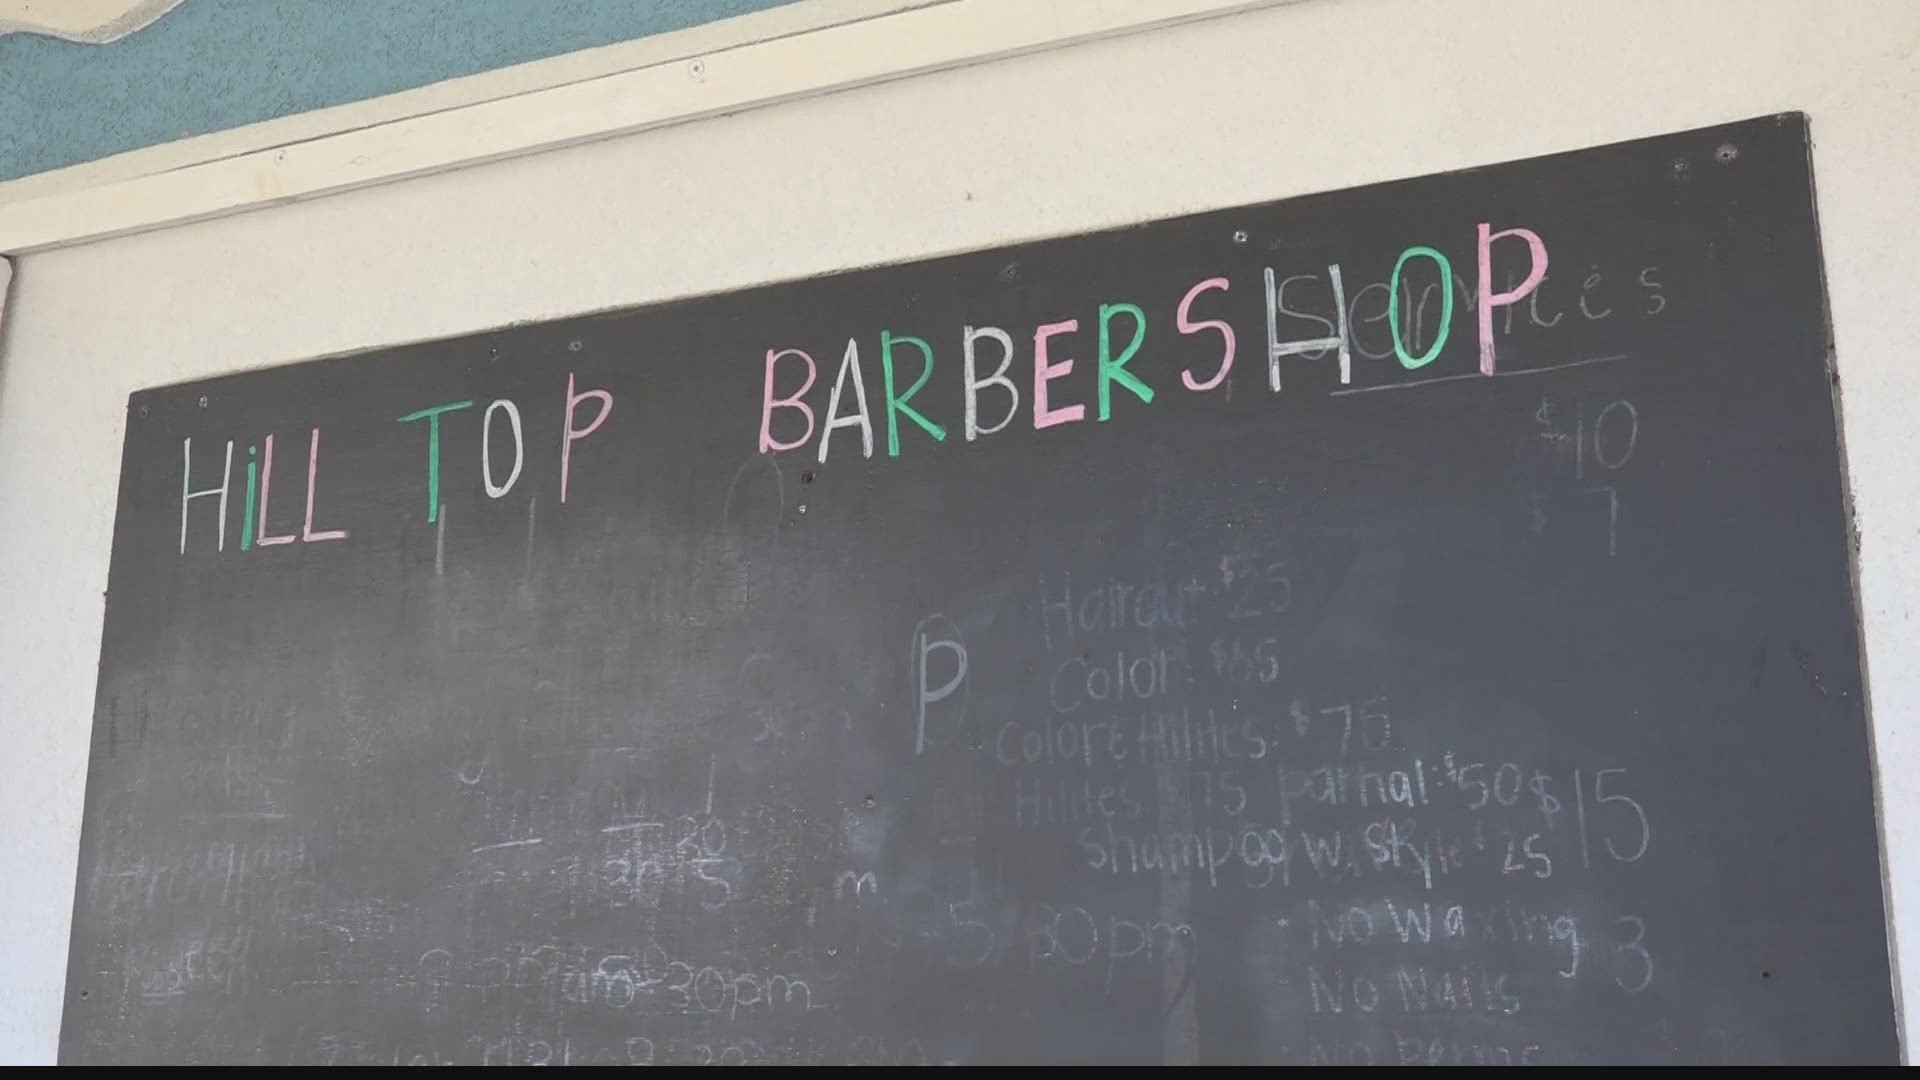 Hilltop Barbershop in Limestone County is offering free haircuts and shaves to those who worked hard to serve the public during the winter storm.